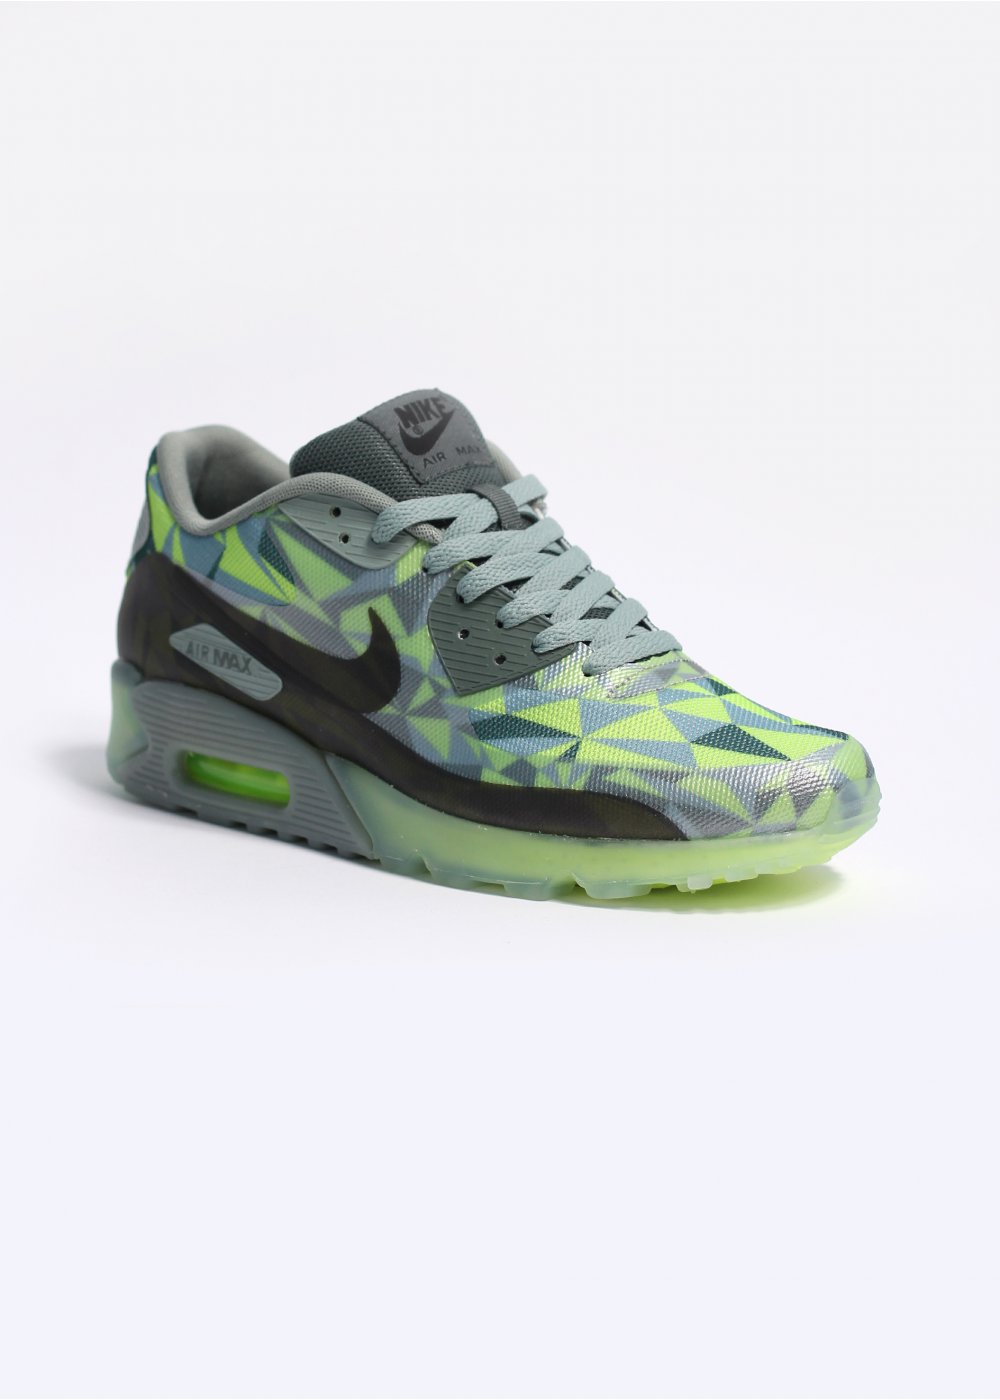 Nike Max 90 ICE Green | Where To Buy | Sole Supplier